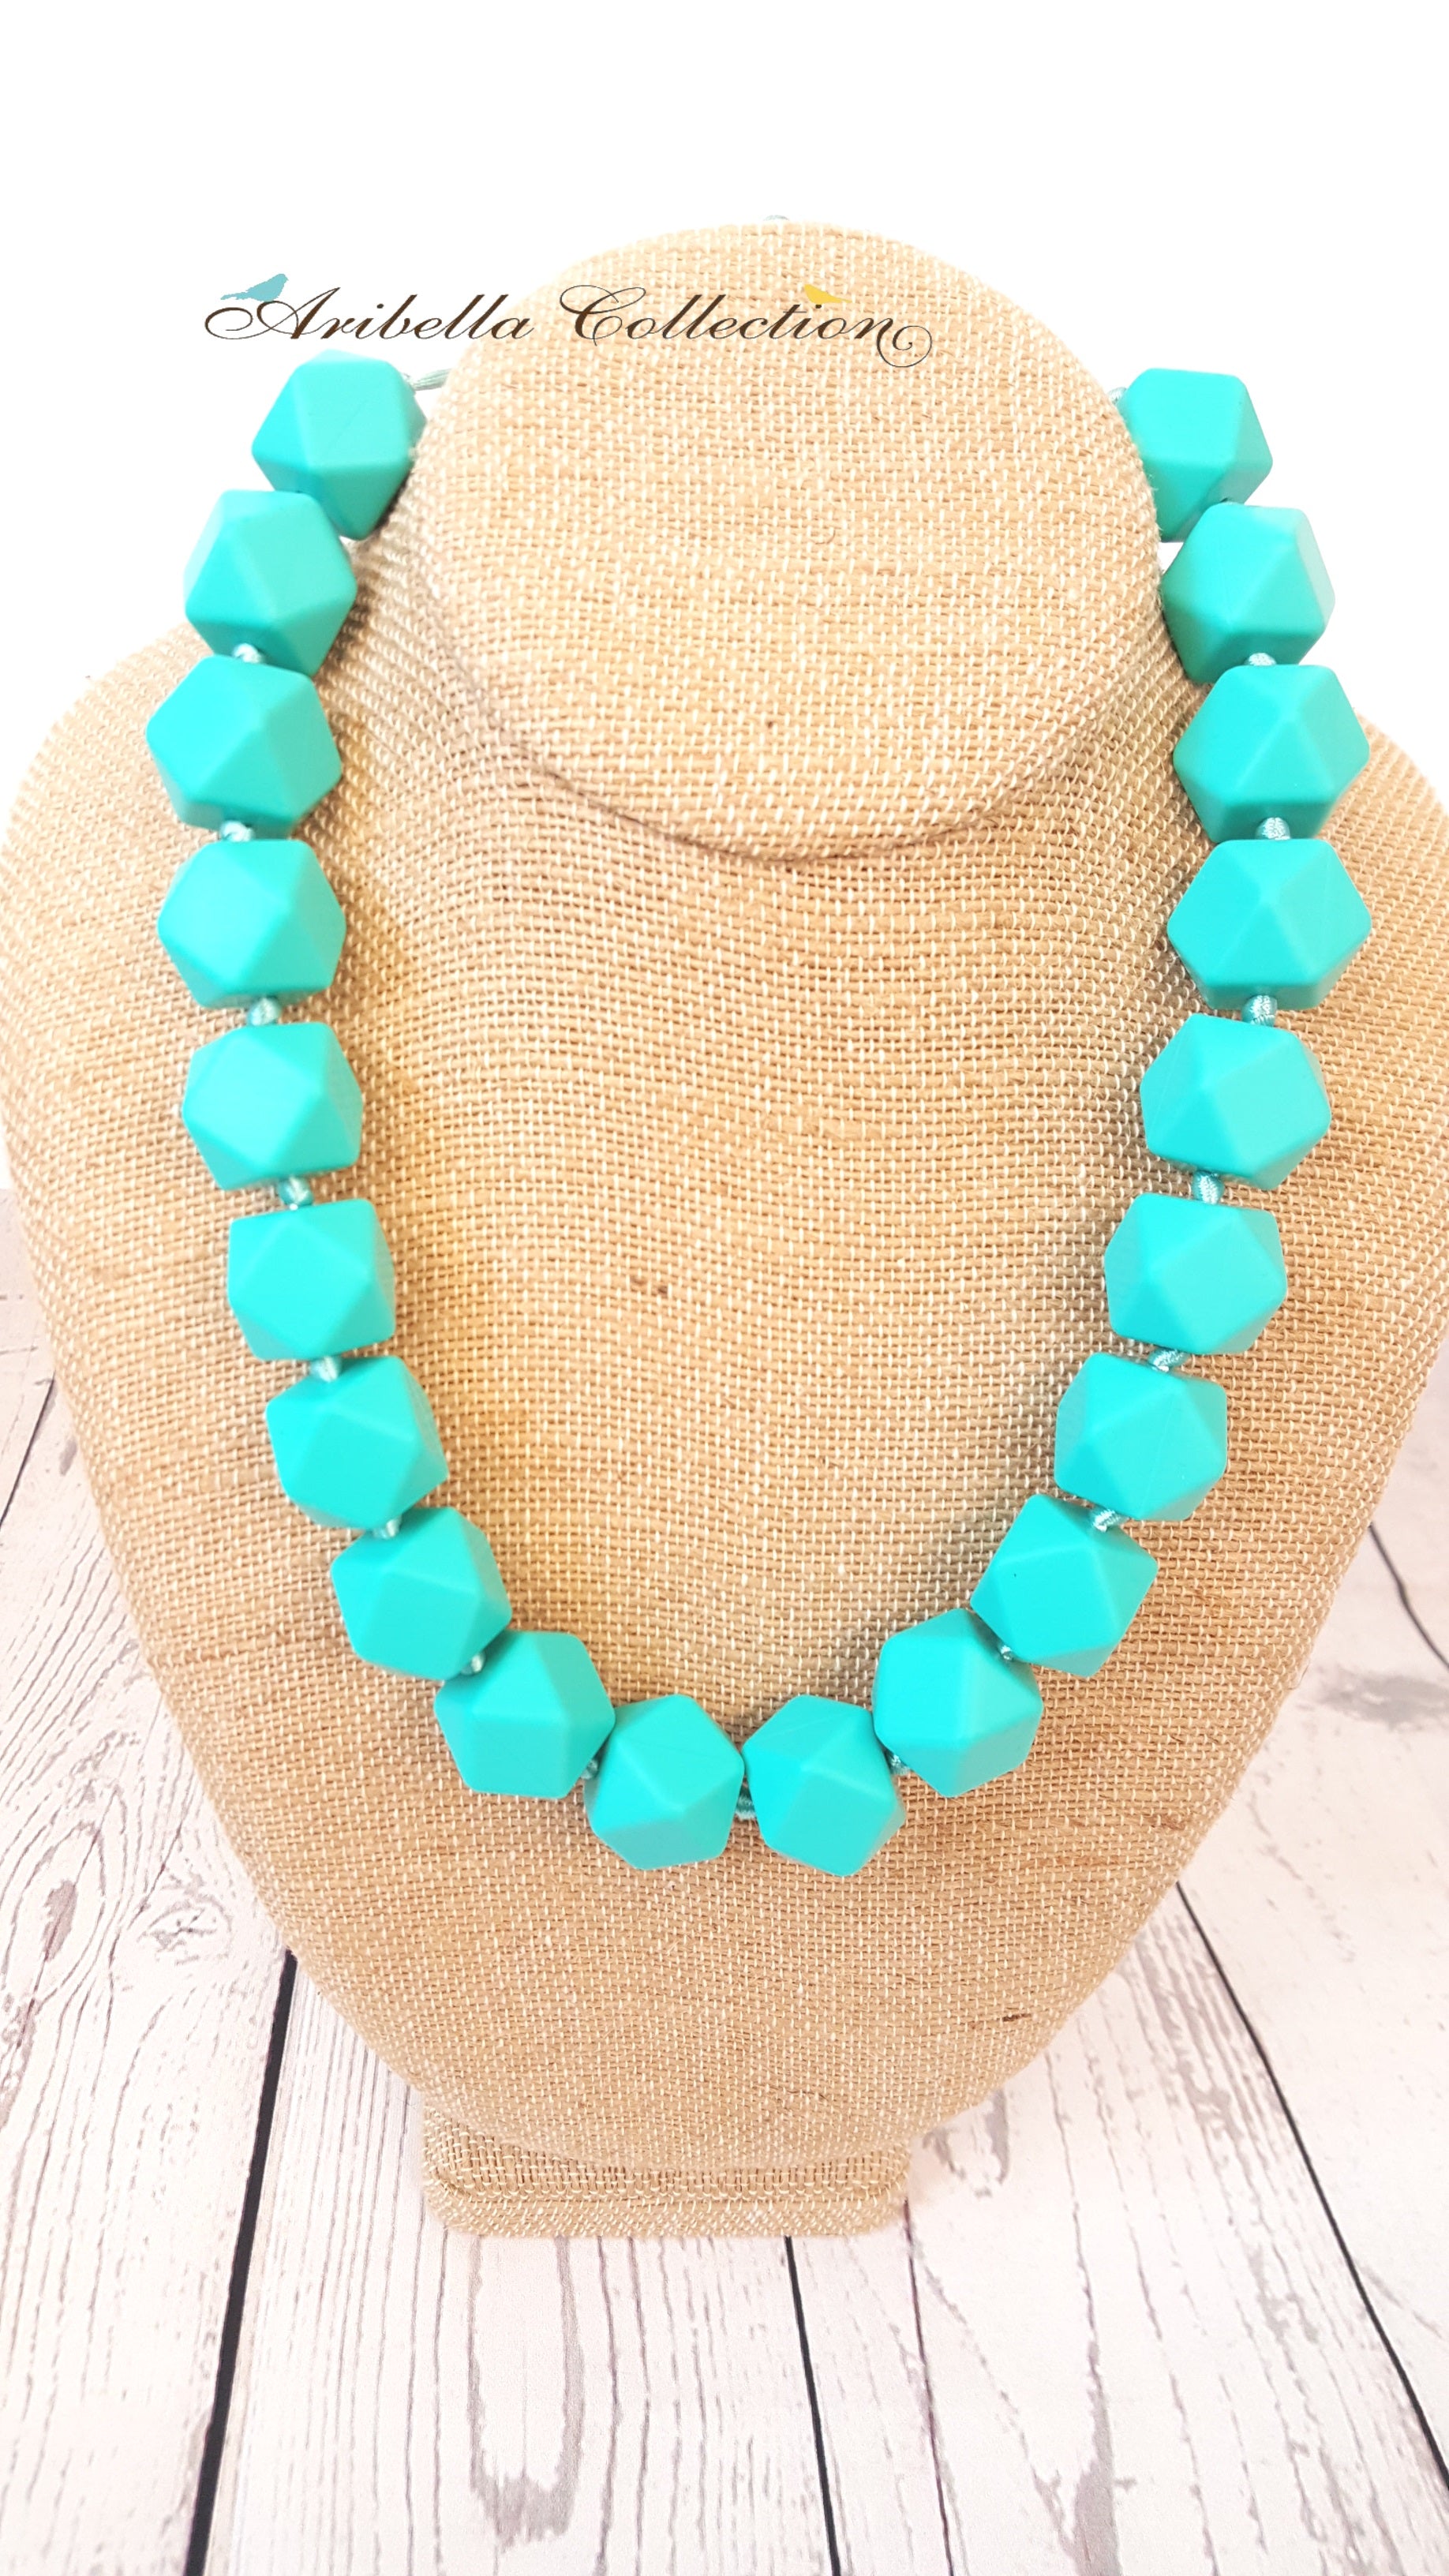 Silicone Necklace - Turquoise - Aribella Collection, Inc.